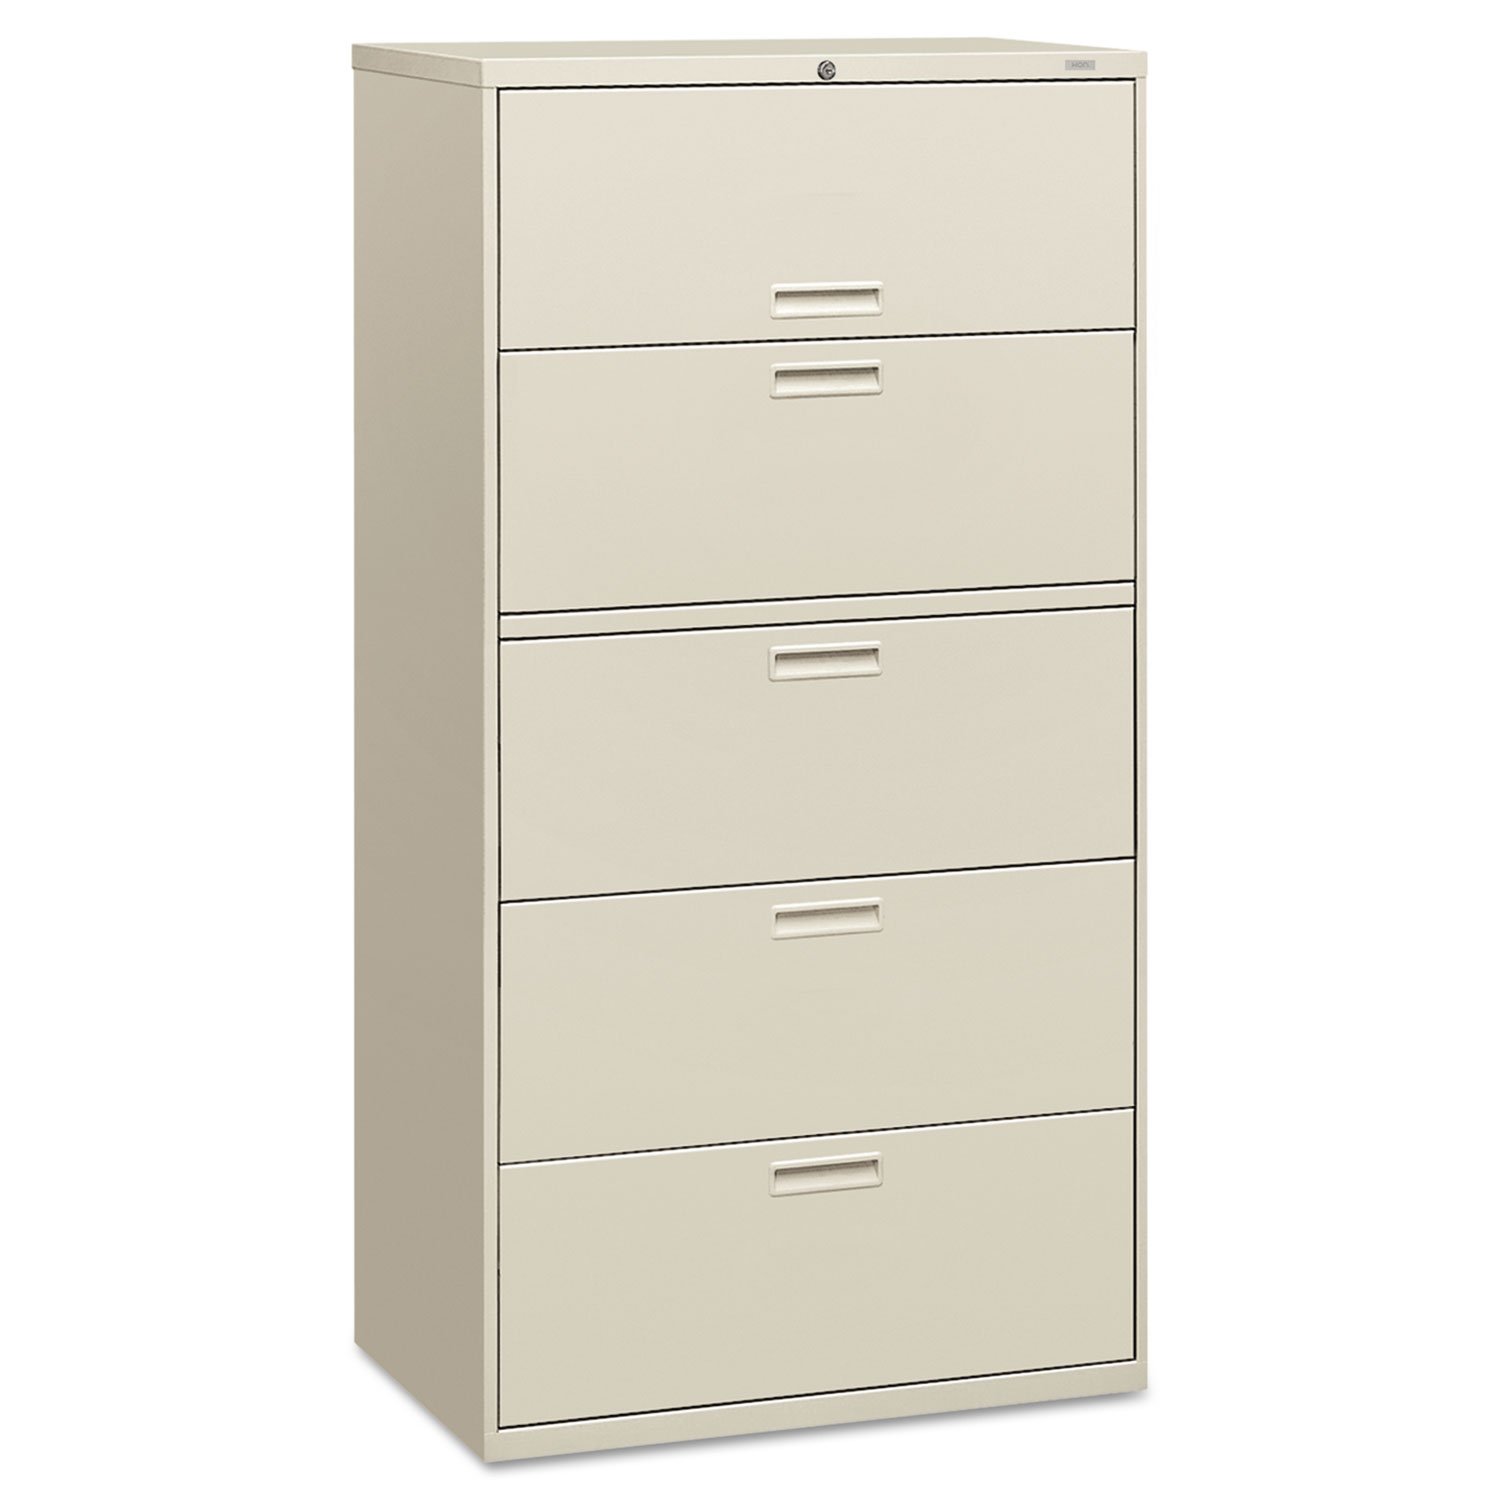 500 Series Five-Drawer Lateral File, 36w x 18d x 64 1/4h, Light Gray